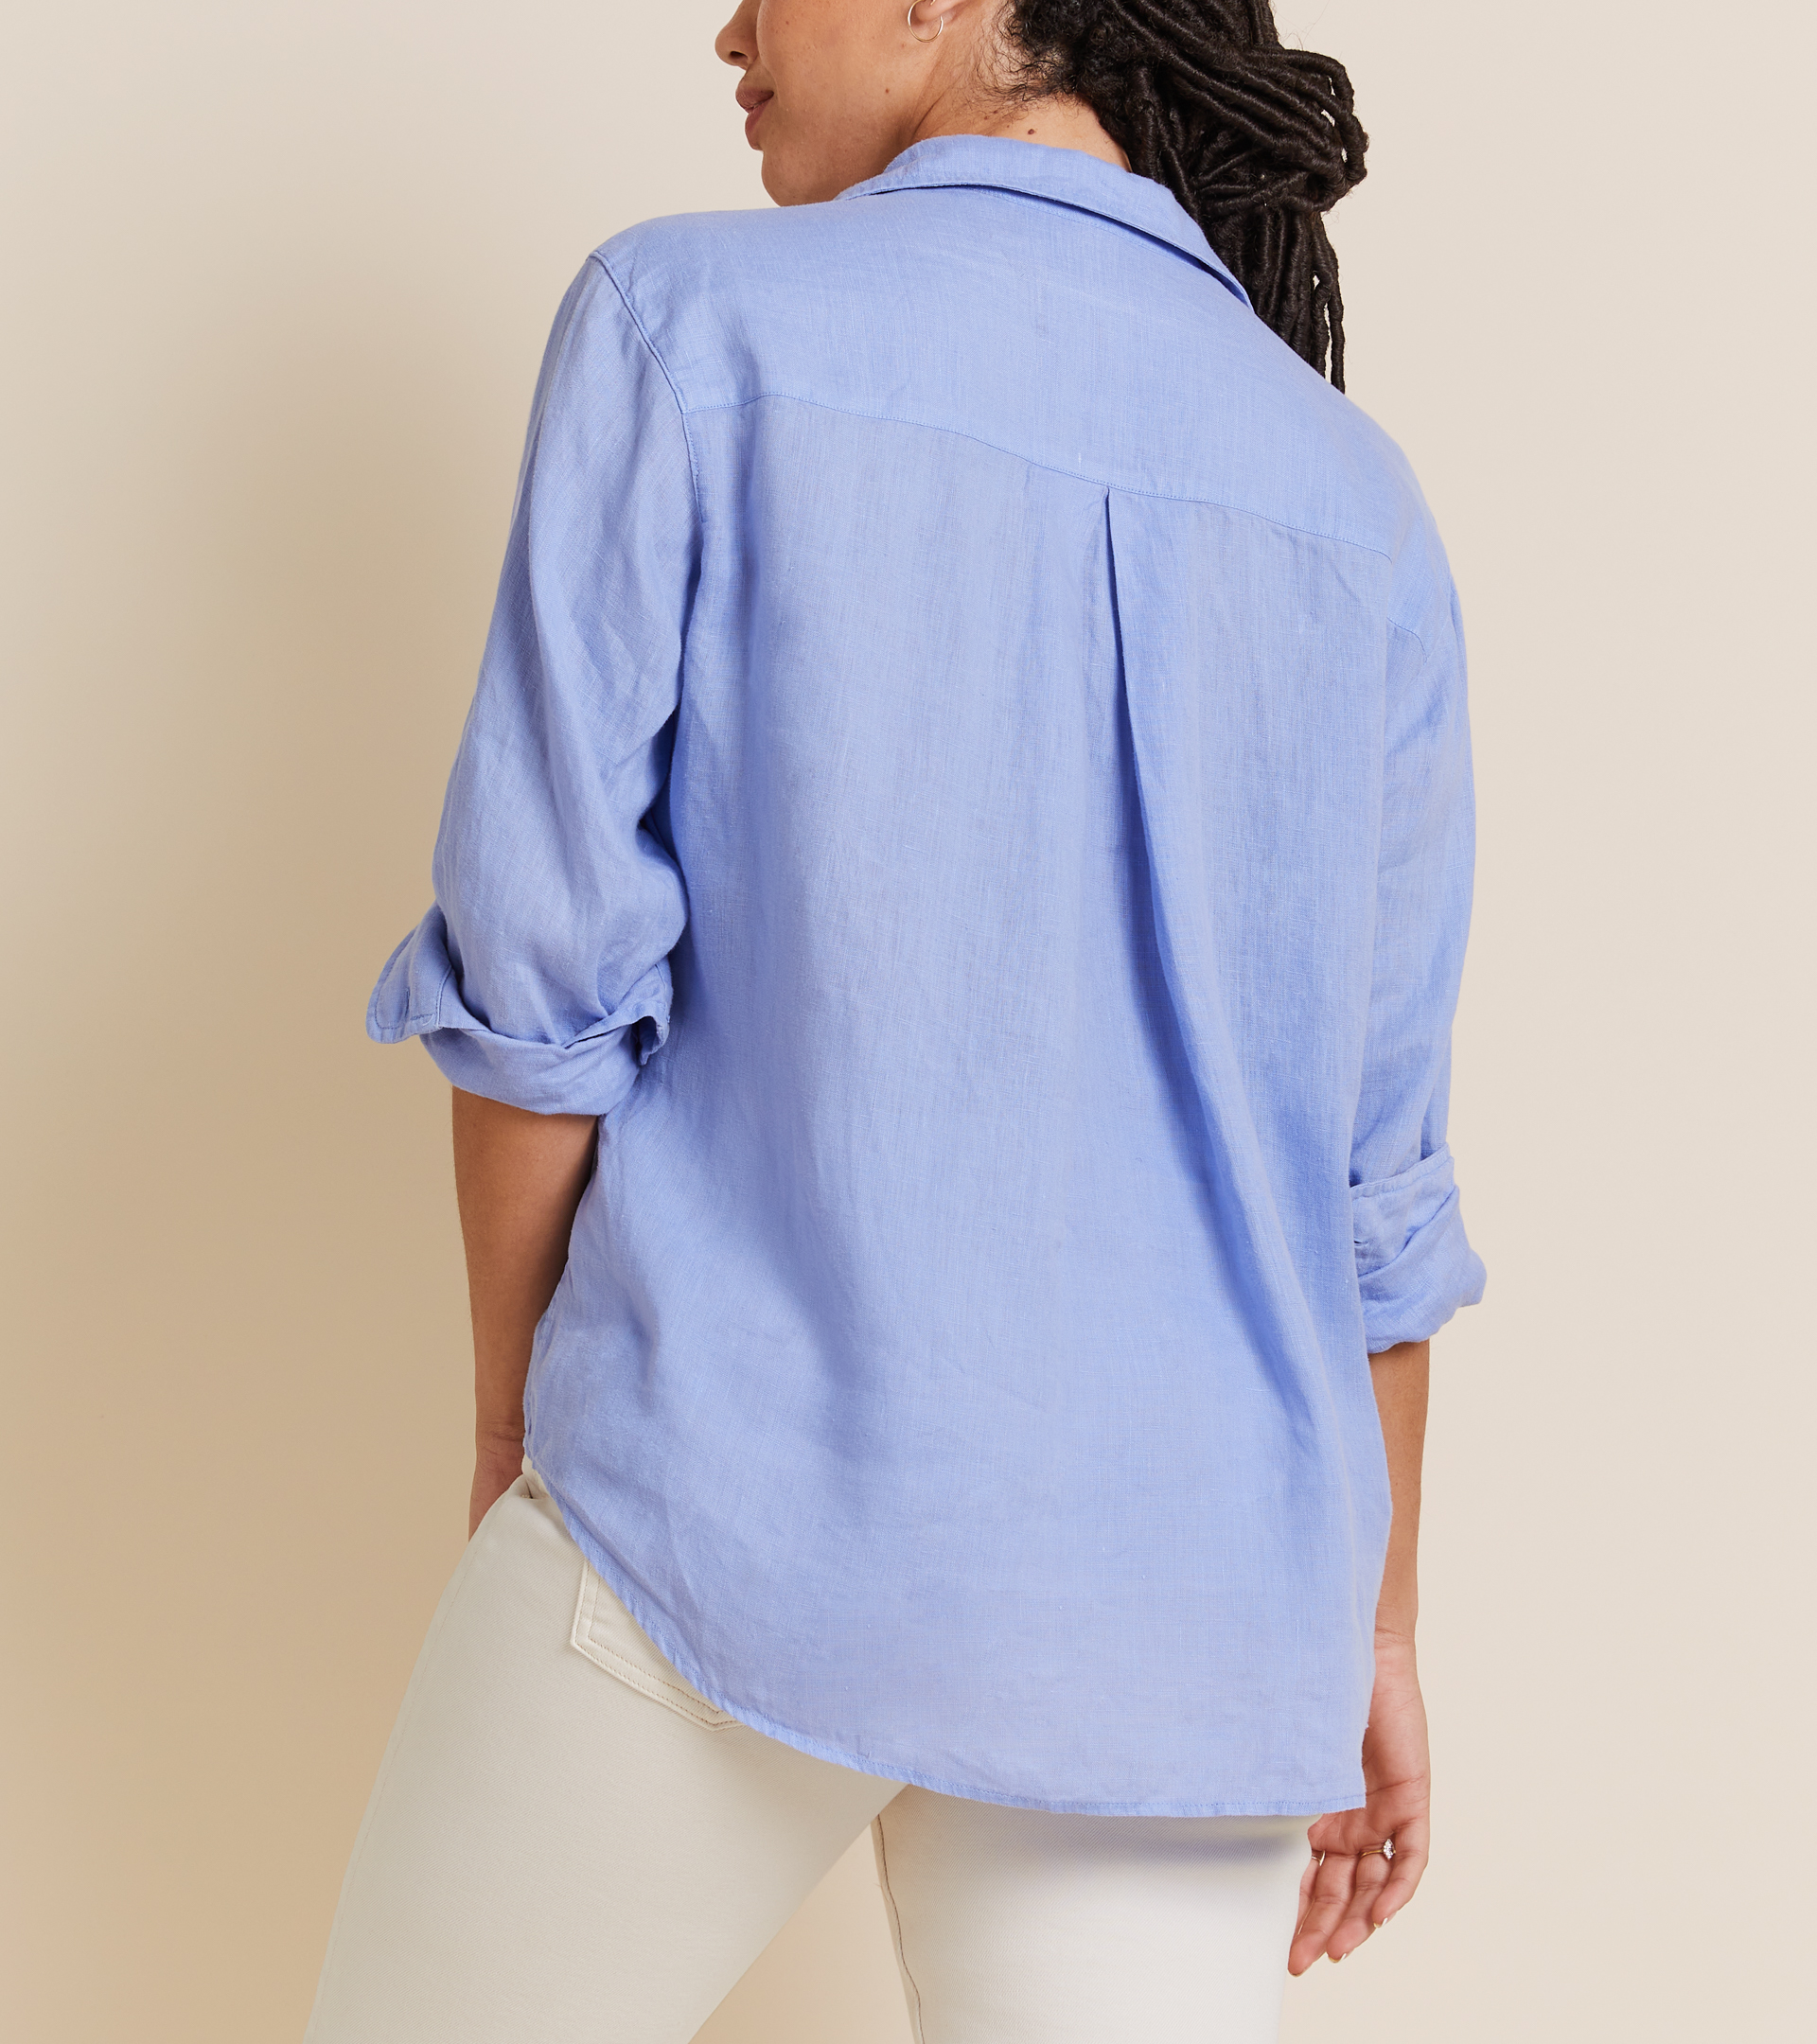 The Hero Button-Up Shirt Periwinkle Blue, Garment Dyed Tumbled Linen view 1